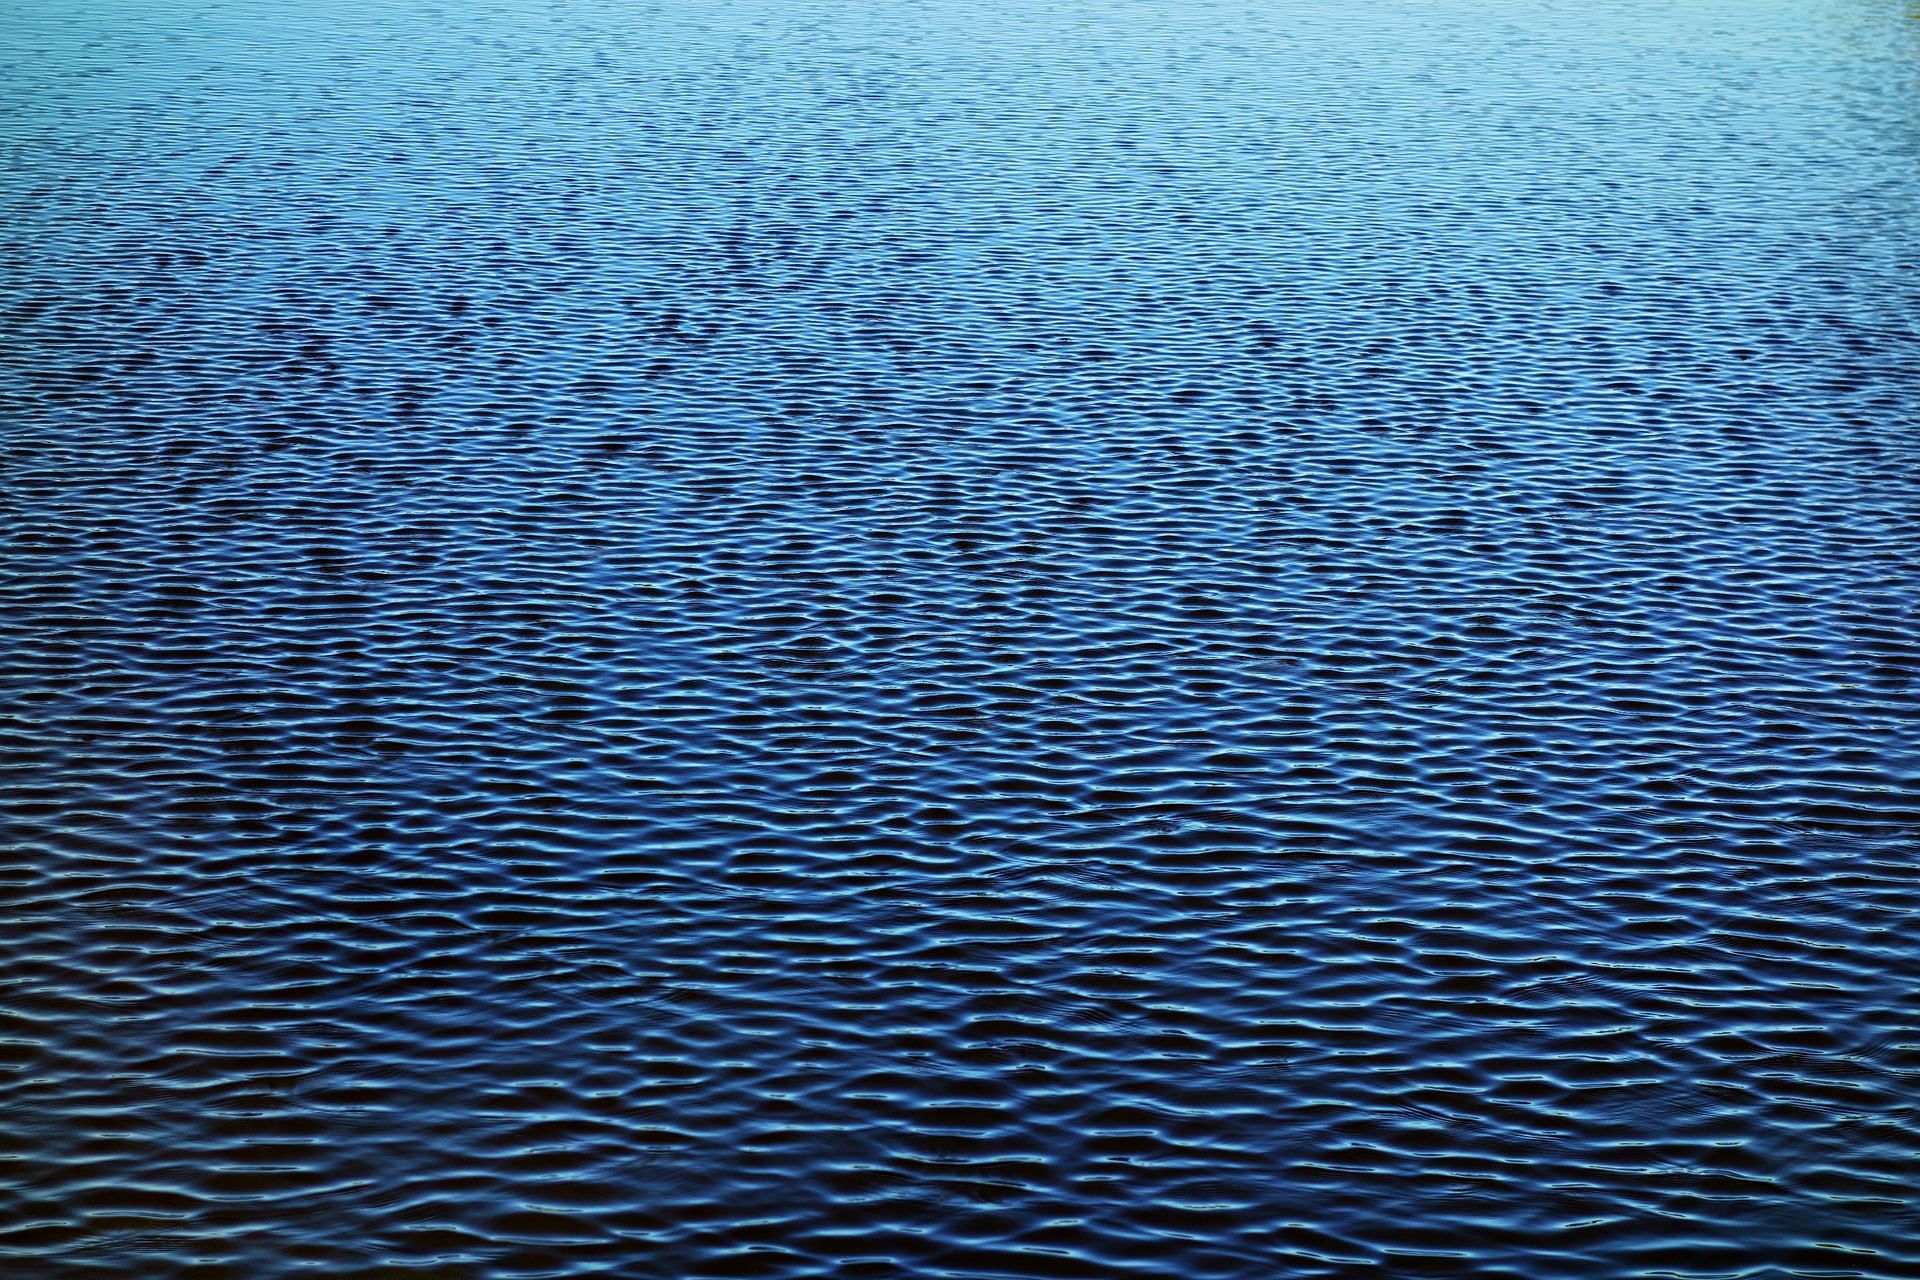 Change, like ripples on the surface of a lake, is infinite.